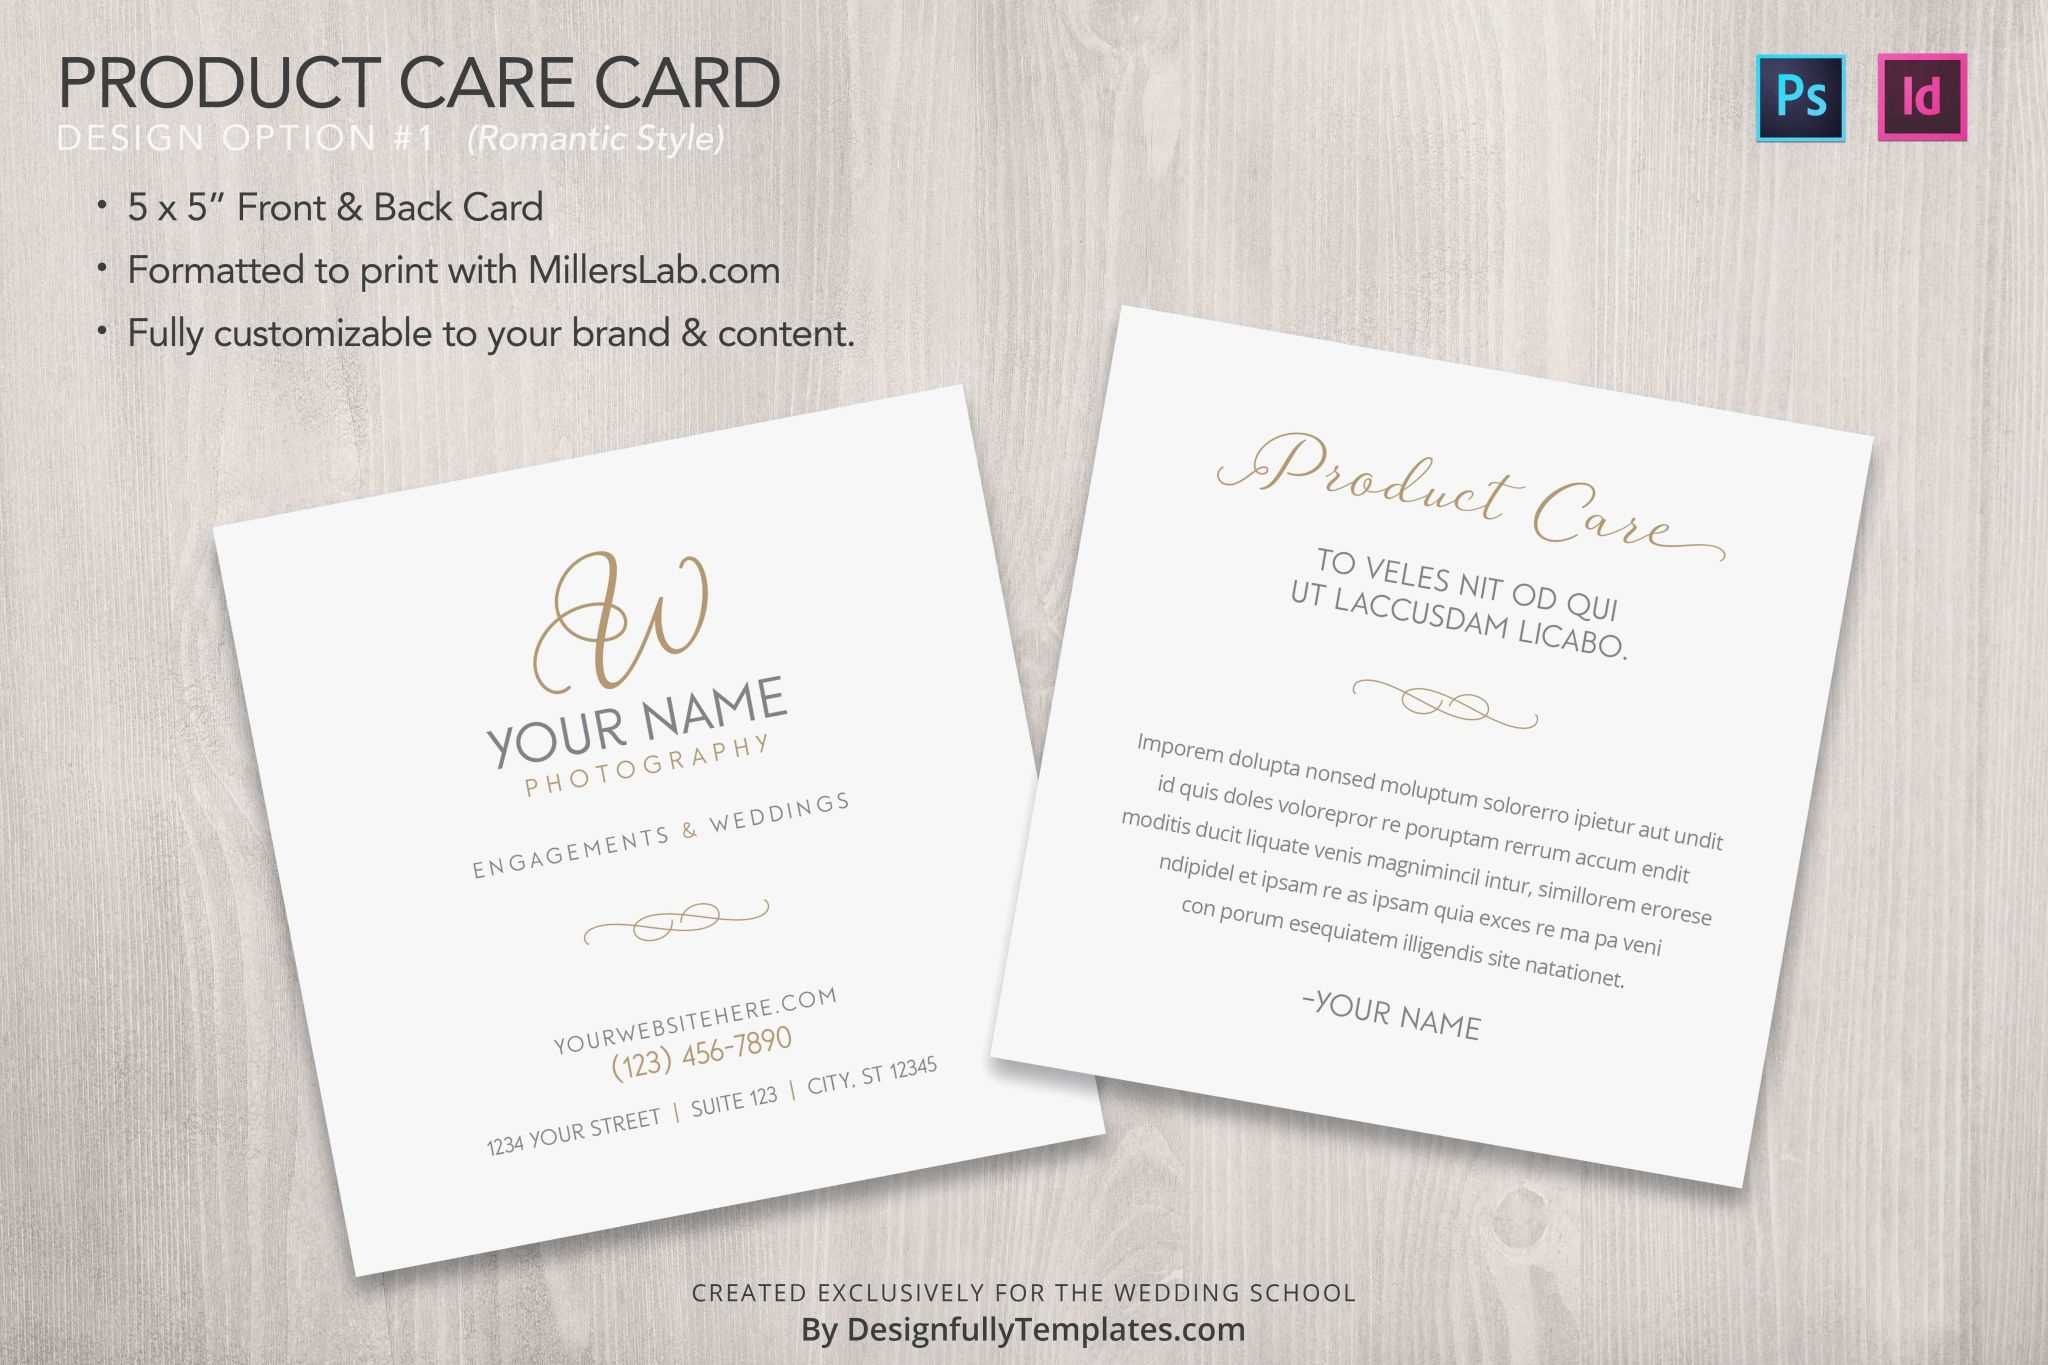 Free Place Card Templates 6 Per Page – Atlantaauctionco Regarding Free Template For Place Cards 6 Per Sheet